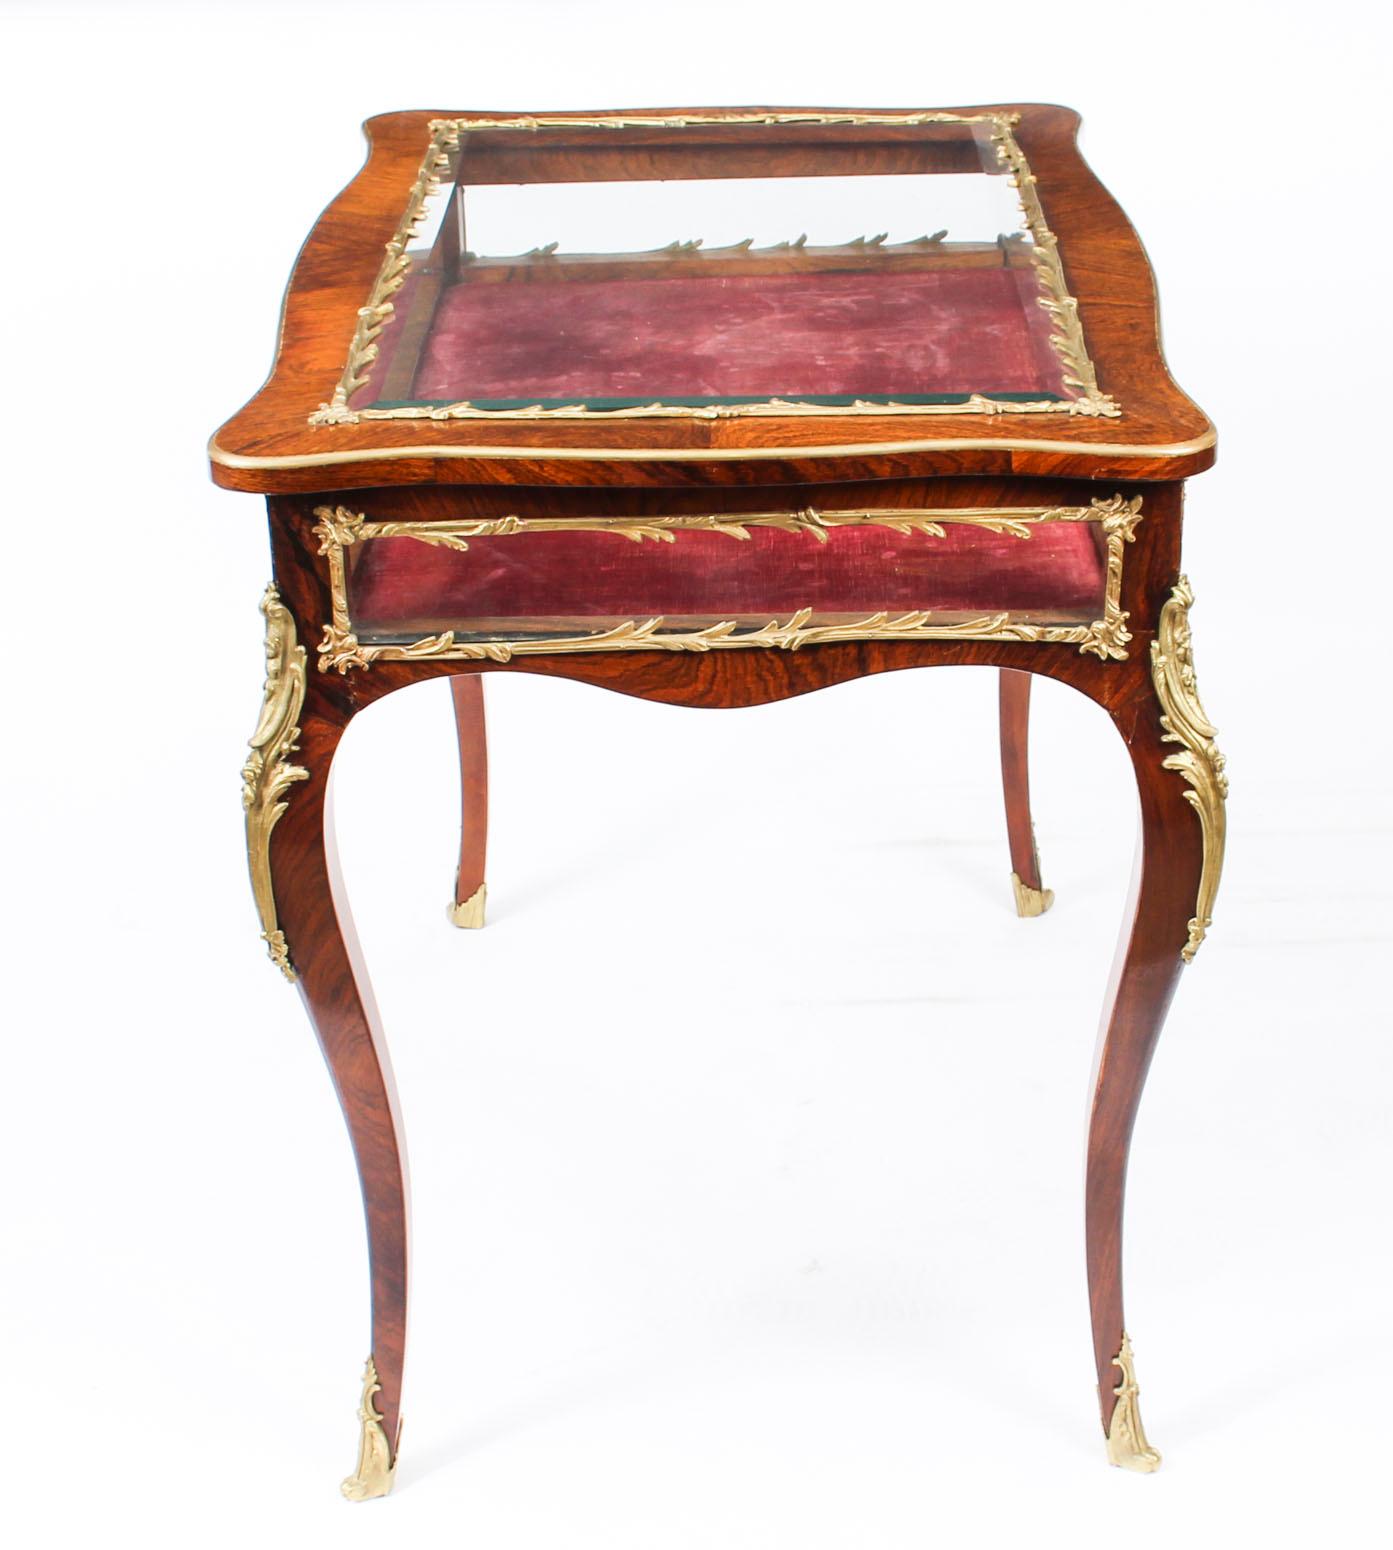 Mid-19th Century Antique French Ormolu Mounted Bijouterie Display Table, 19th Century